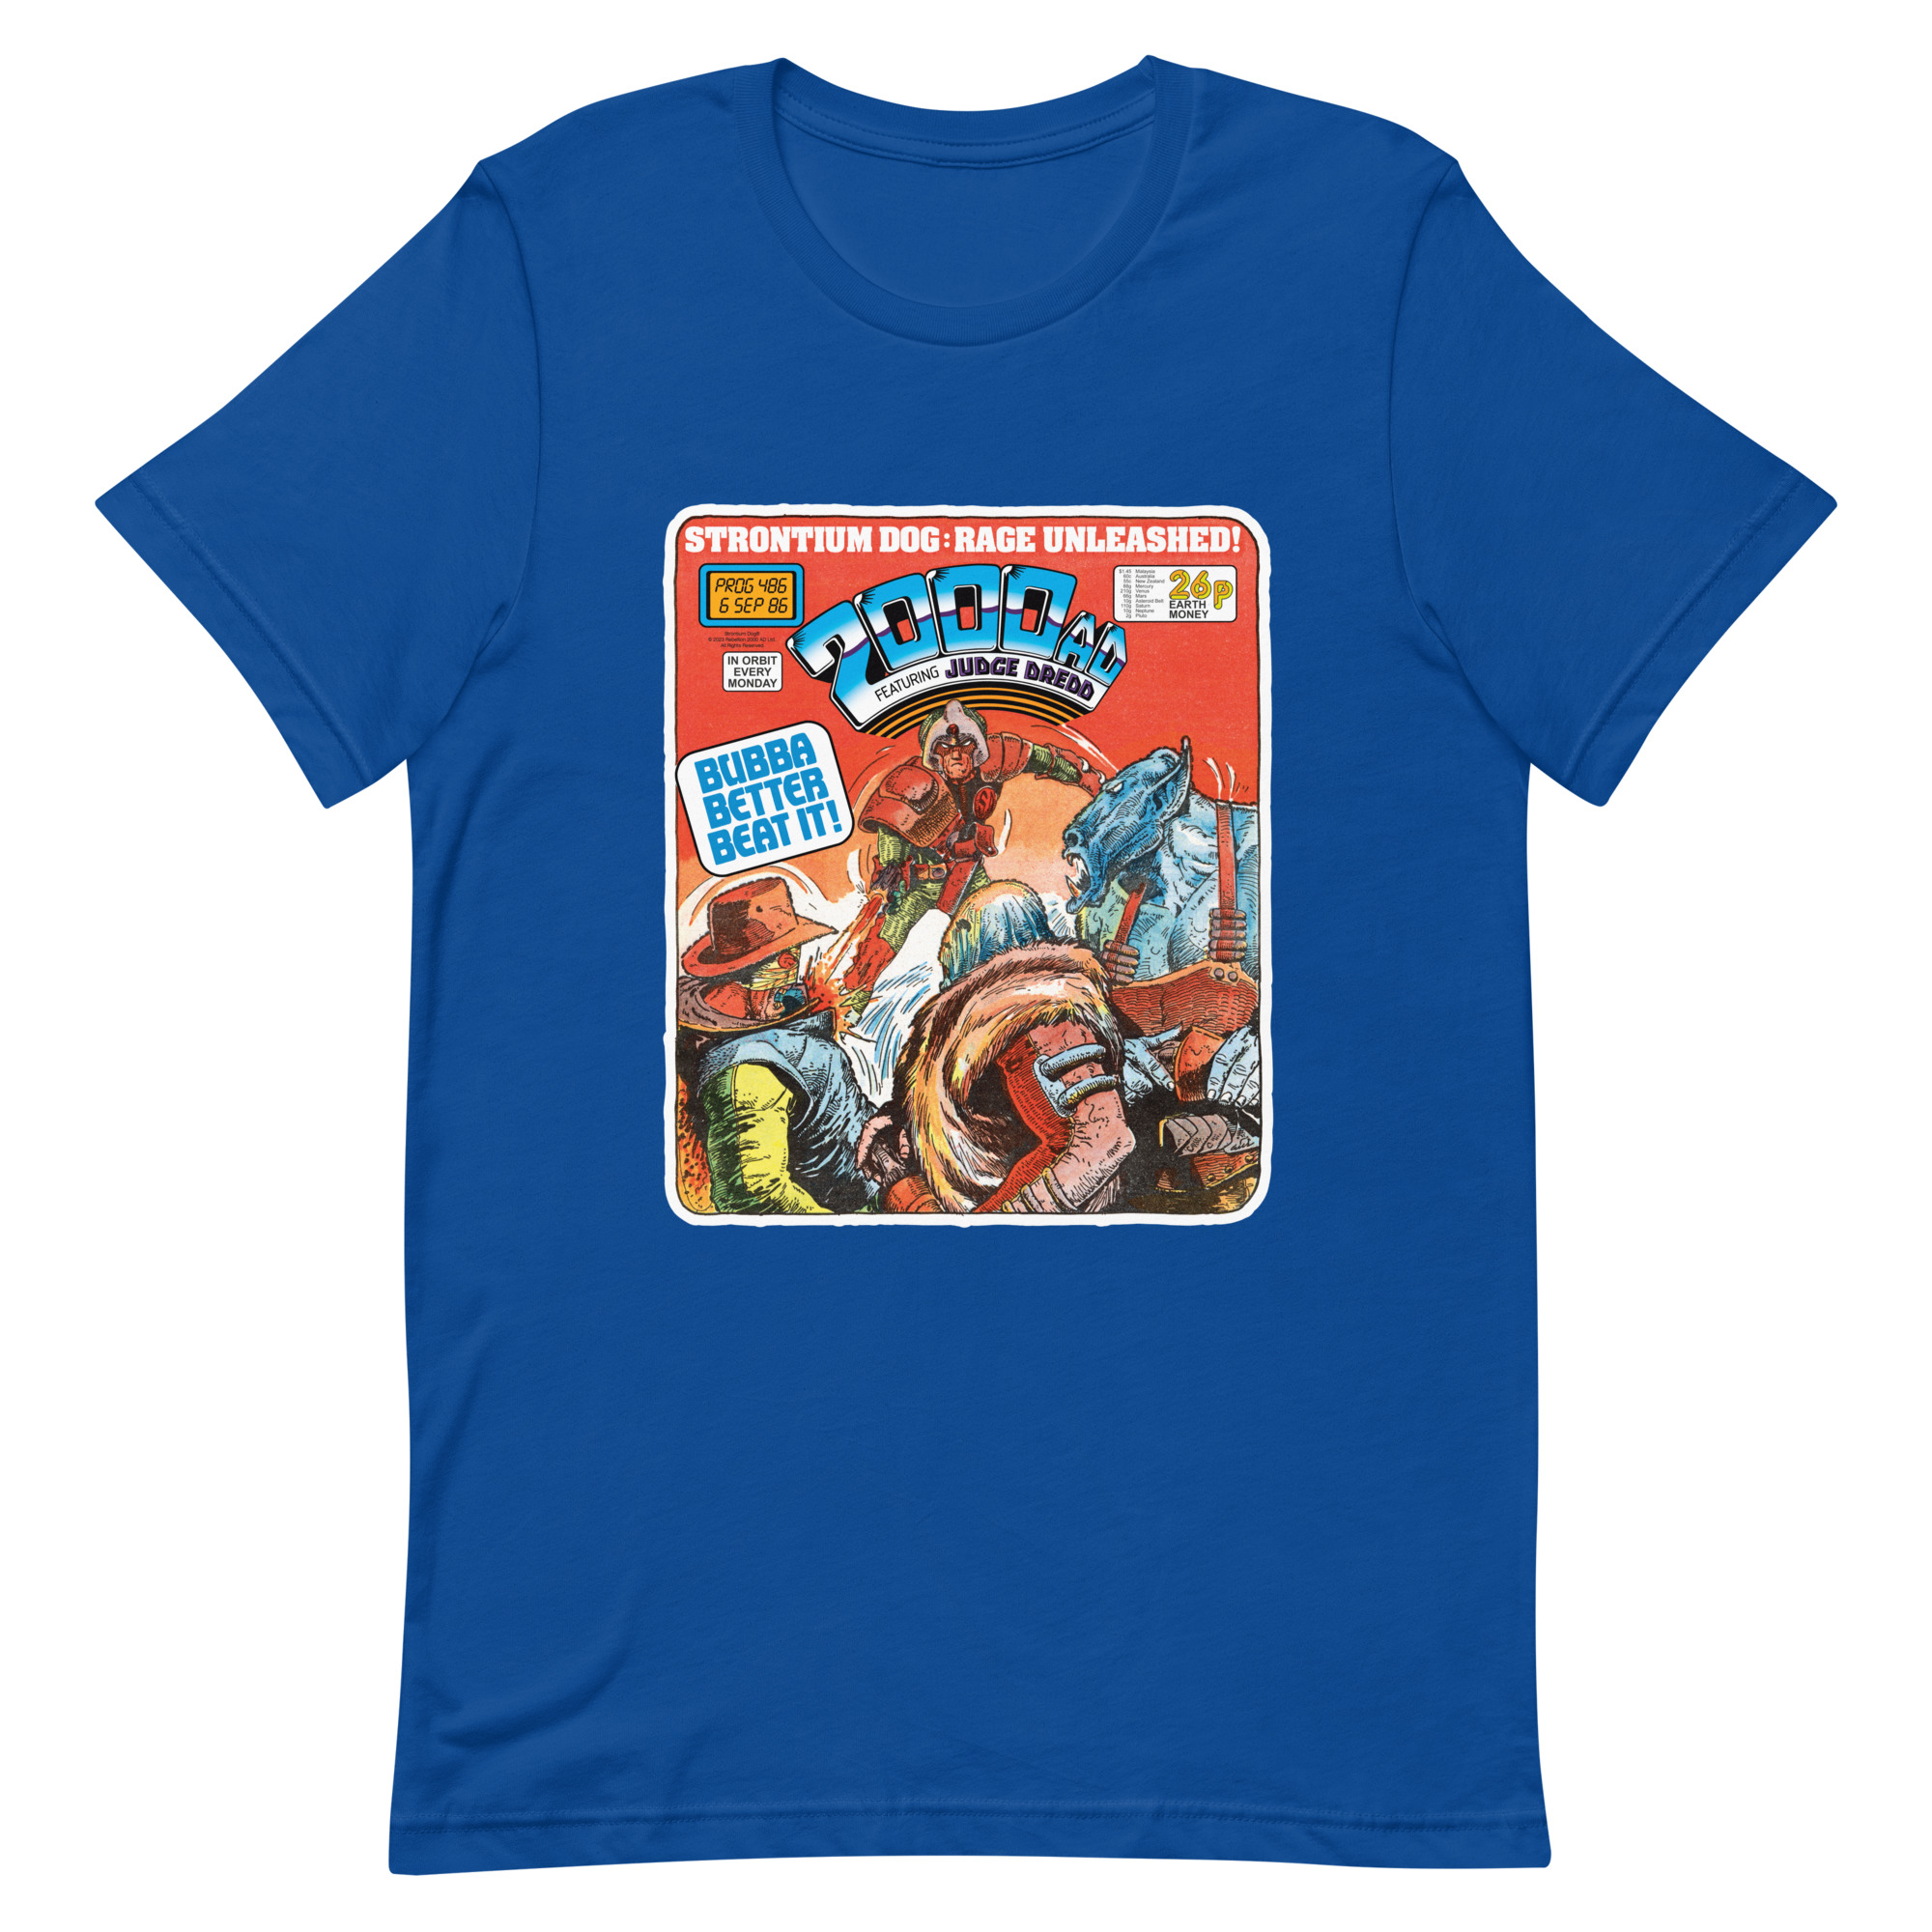 Royal Blue Tshirt with a 'Classic' 2000 AD Cover image on the chest. In the image Strontium Dog faces off against three alien ruffians.